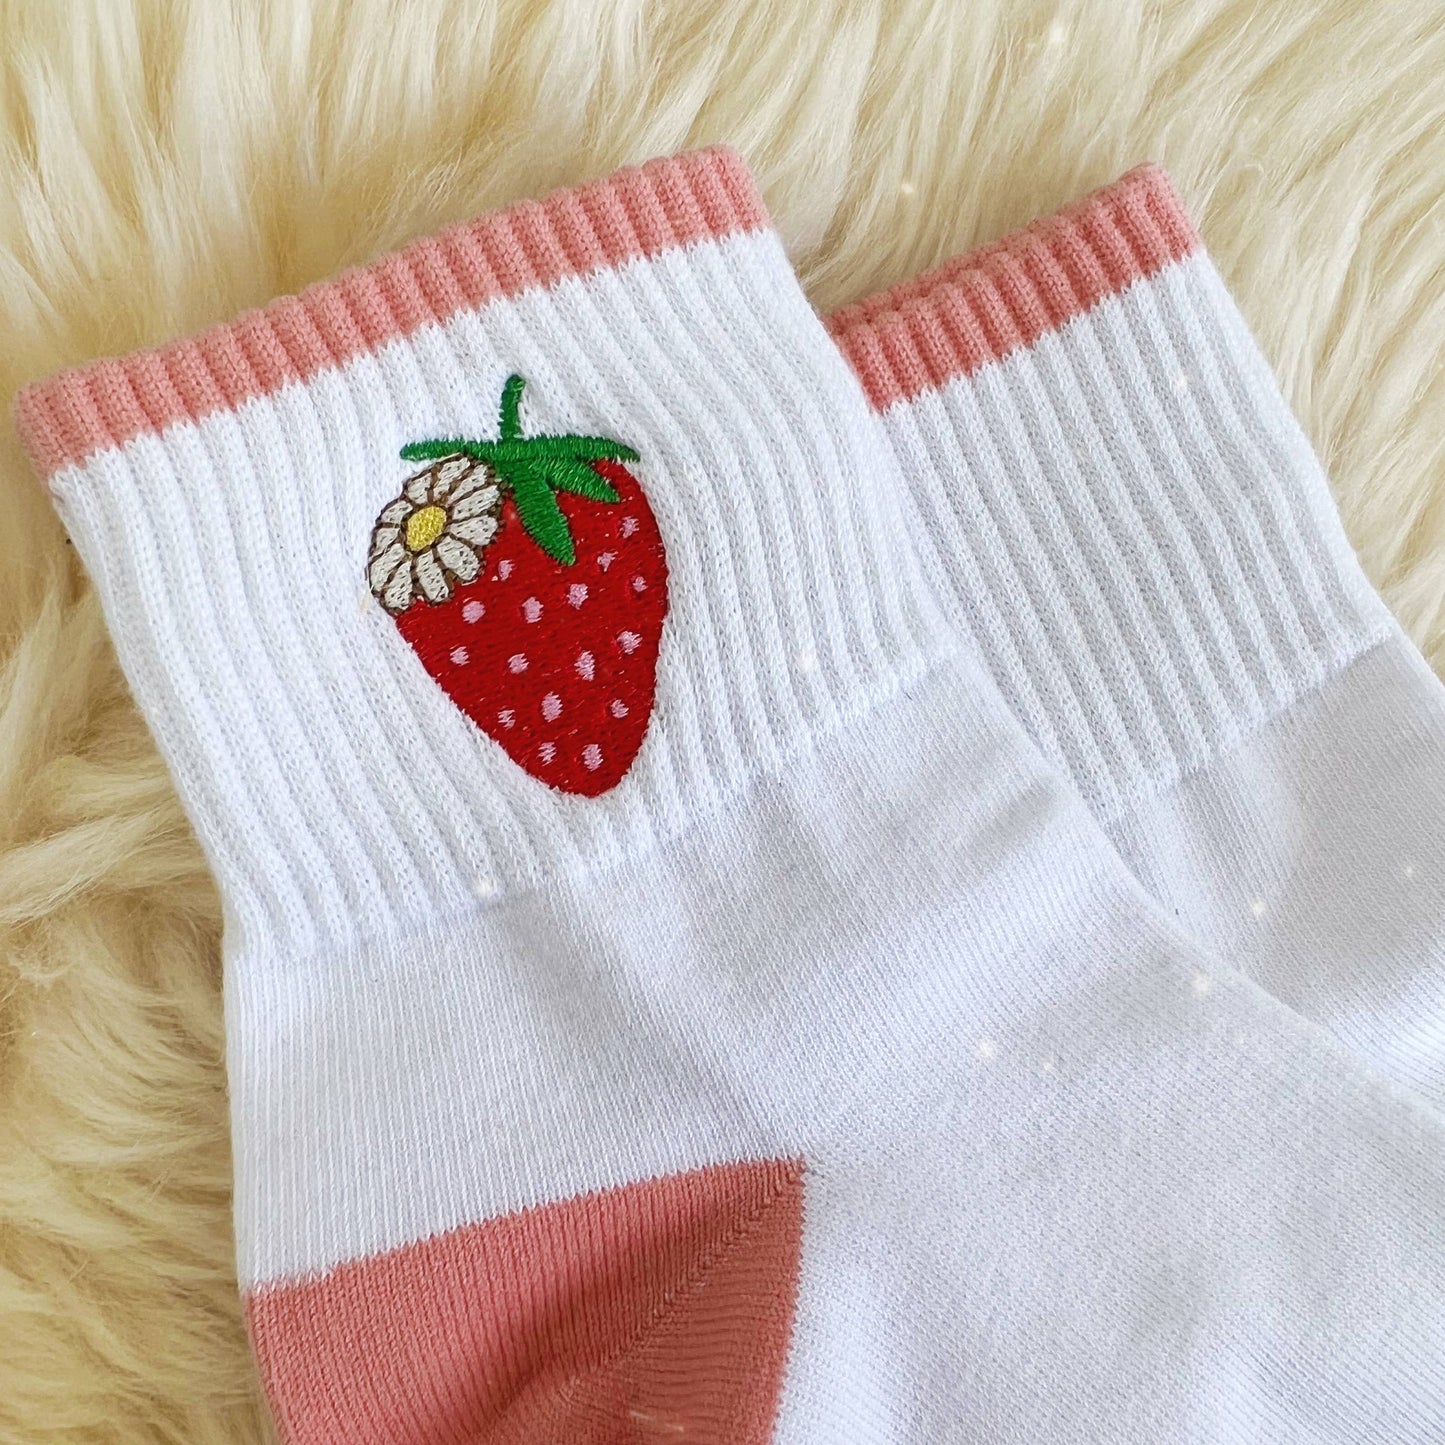 Strawberry Embroidered Socks